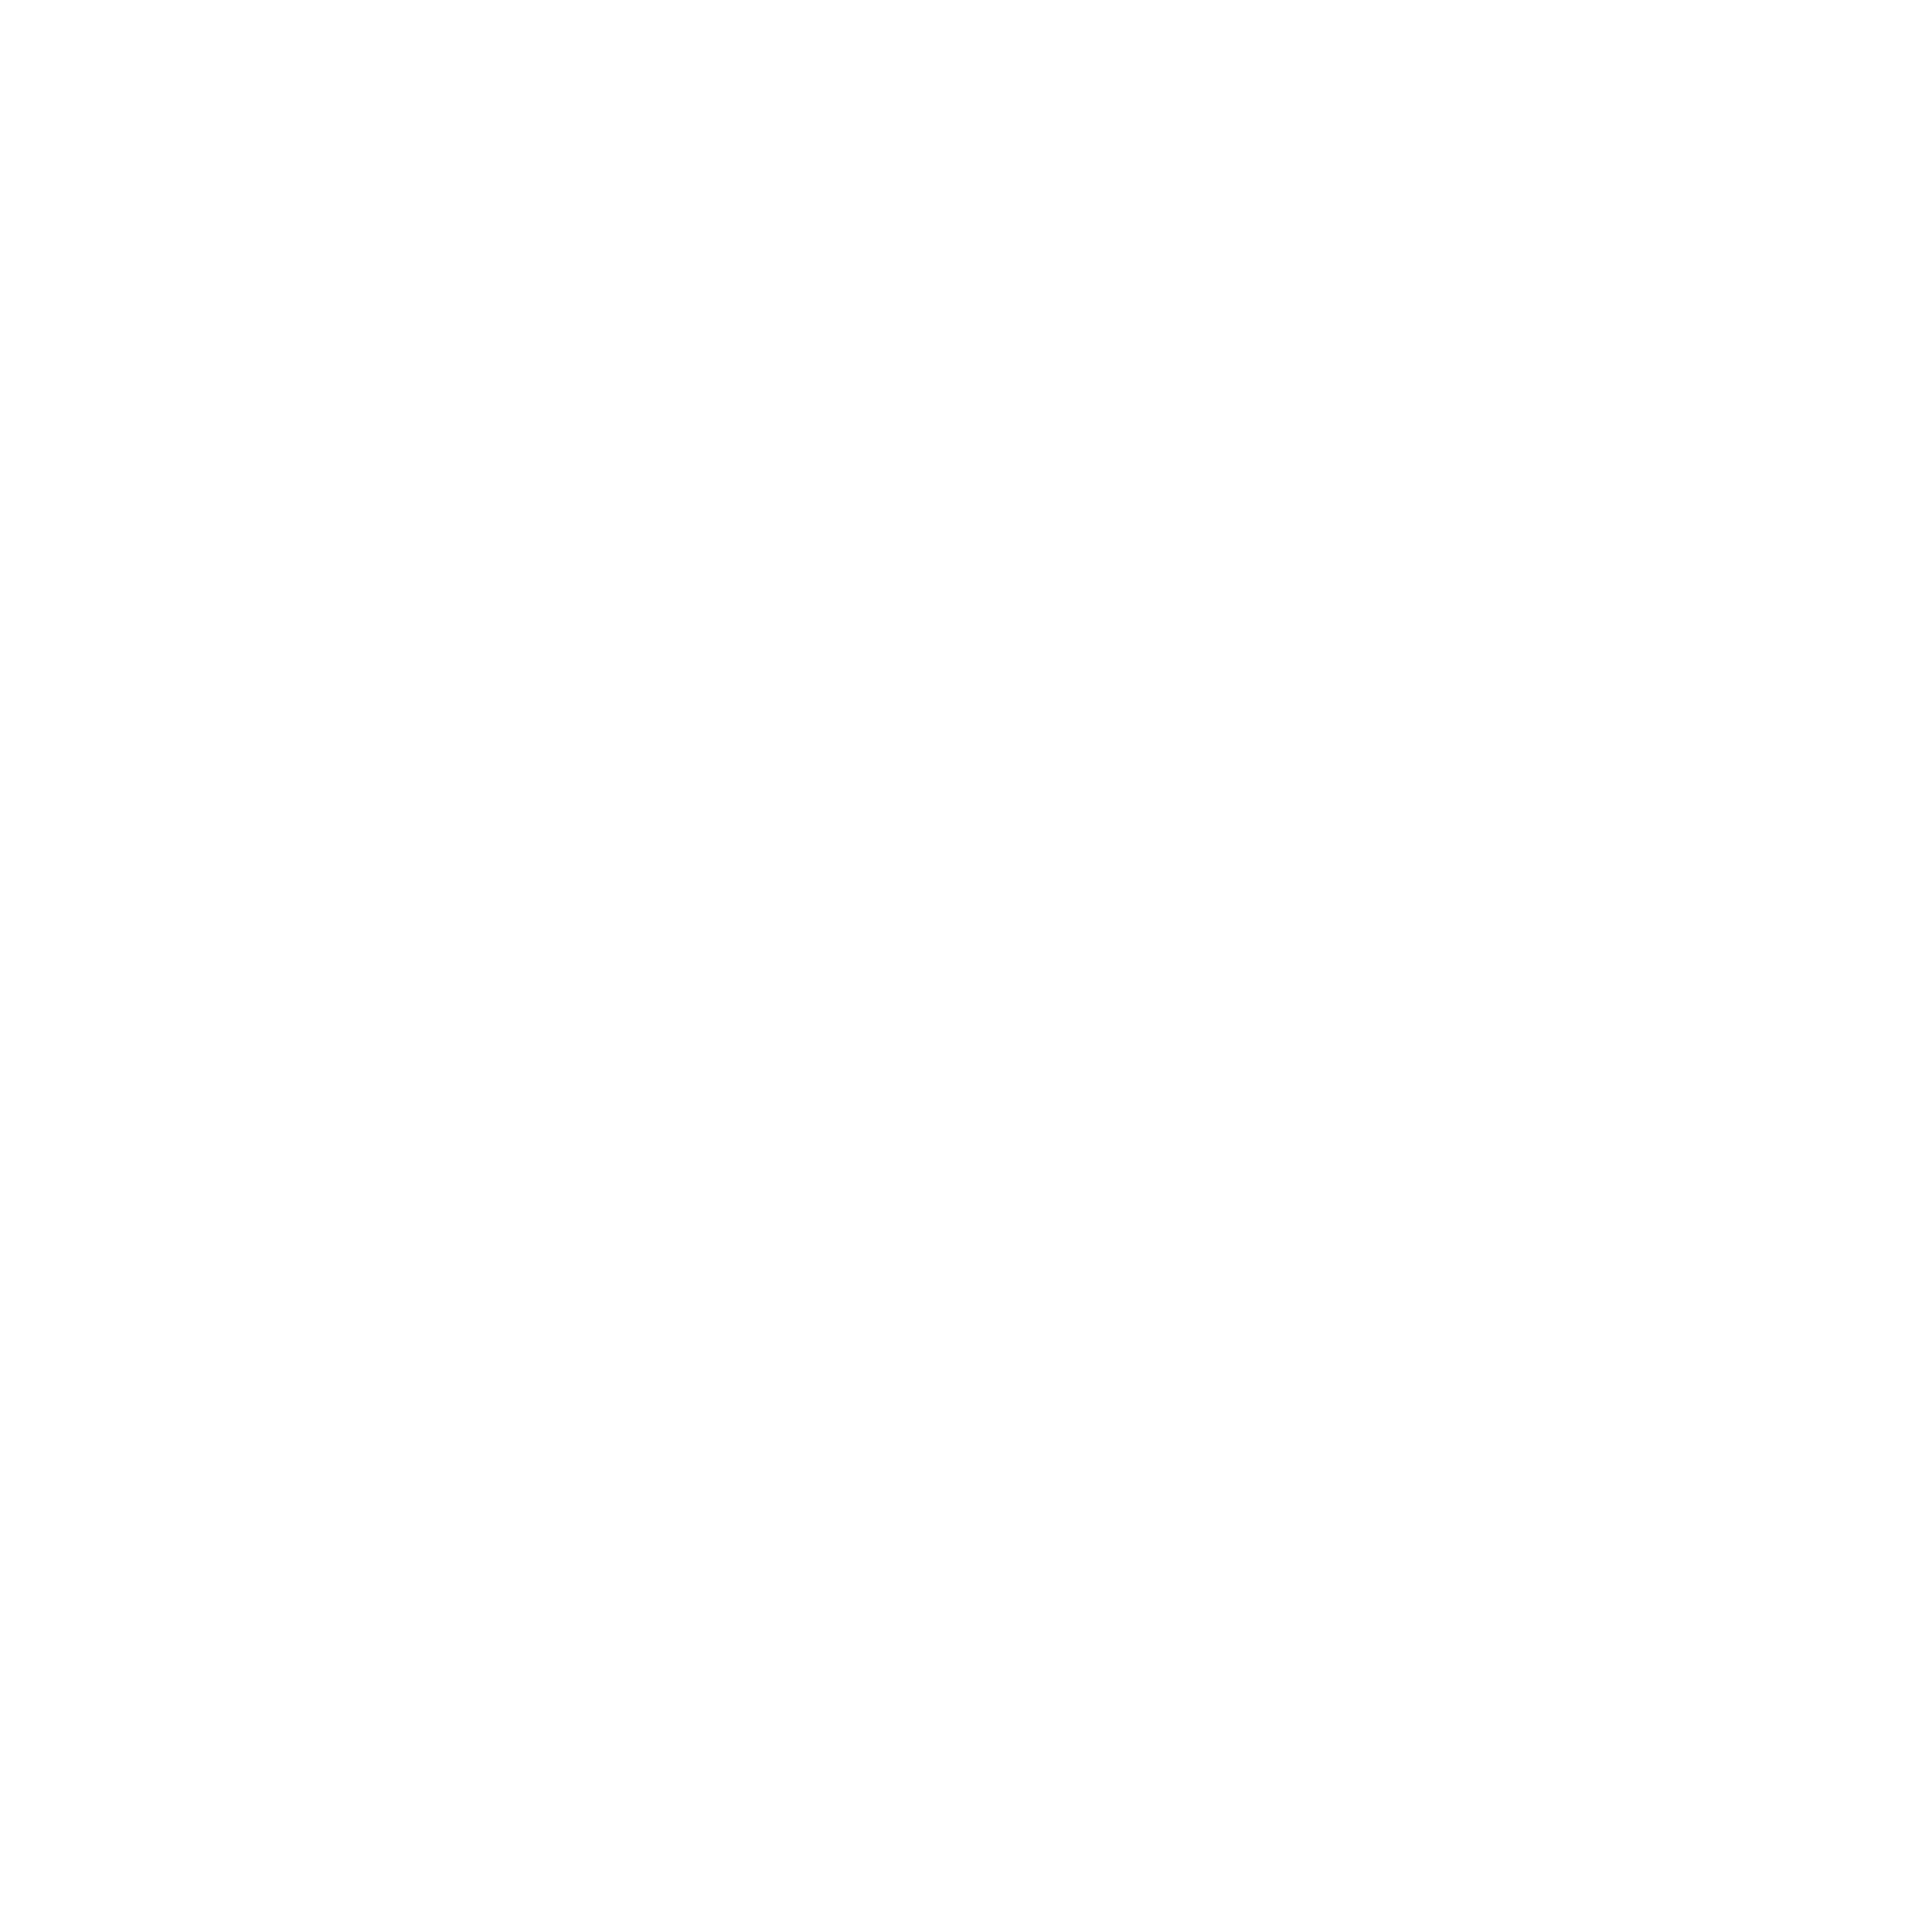 Willow Beggs